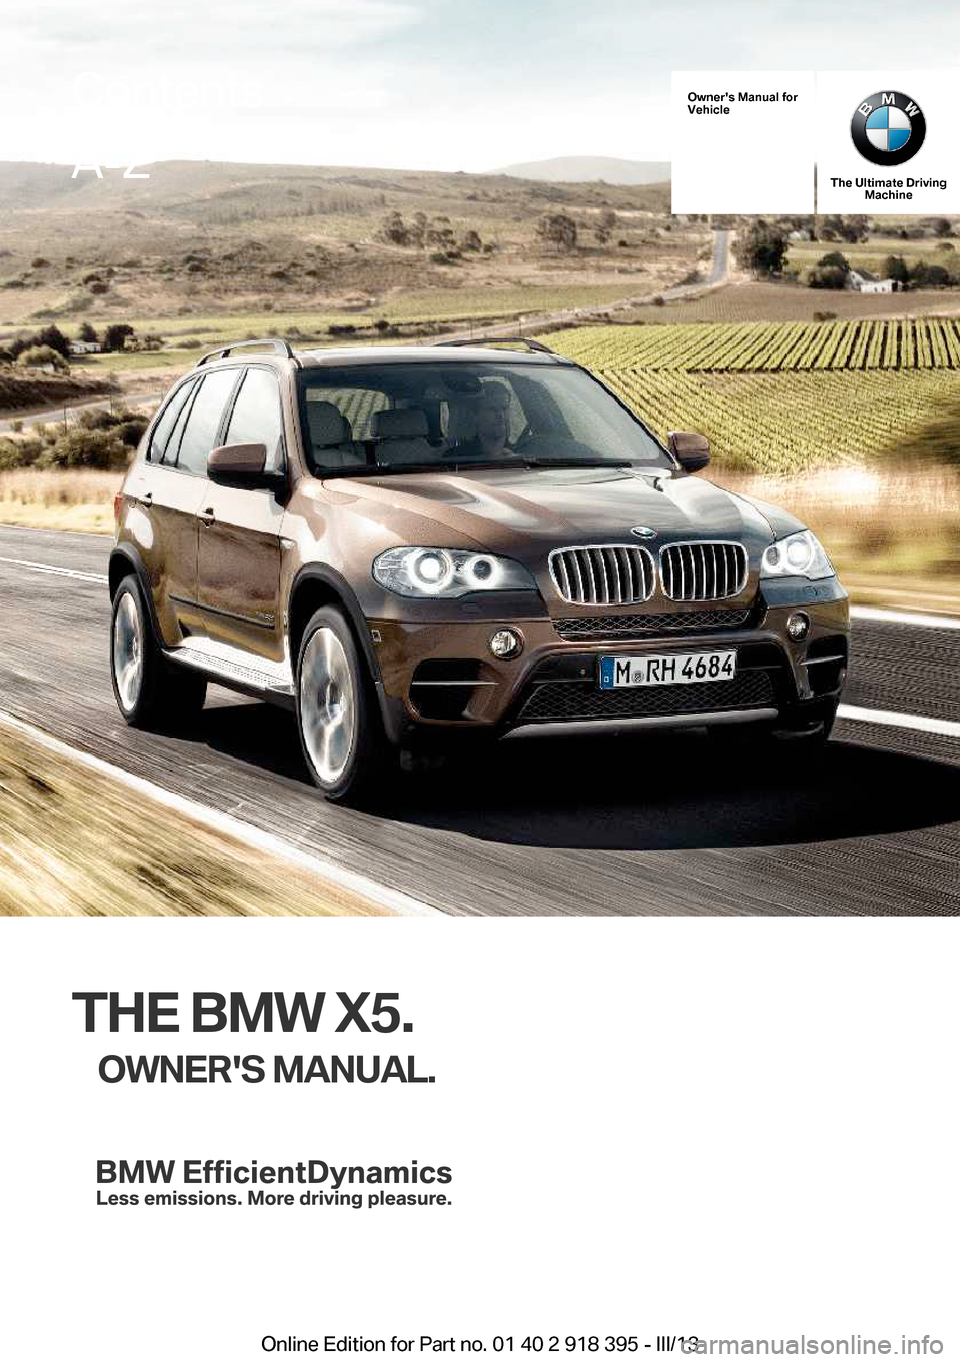 BMW X6 2013 E71 Owners Manual Owners Manual for
Vehicle
The Ultimate Driving Machine
THE BMW X5.
OWNERS MANUAL.
ContentsA-Z
Online Edition for Part no. 01 40 2 918 395 - III/13   